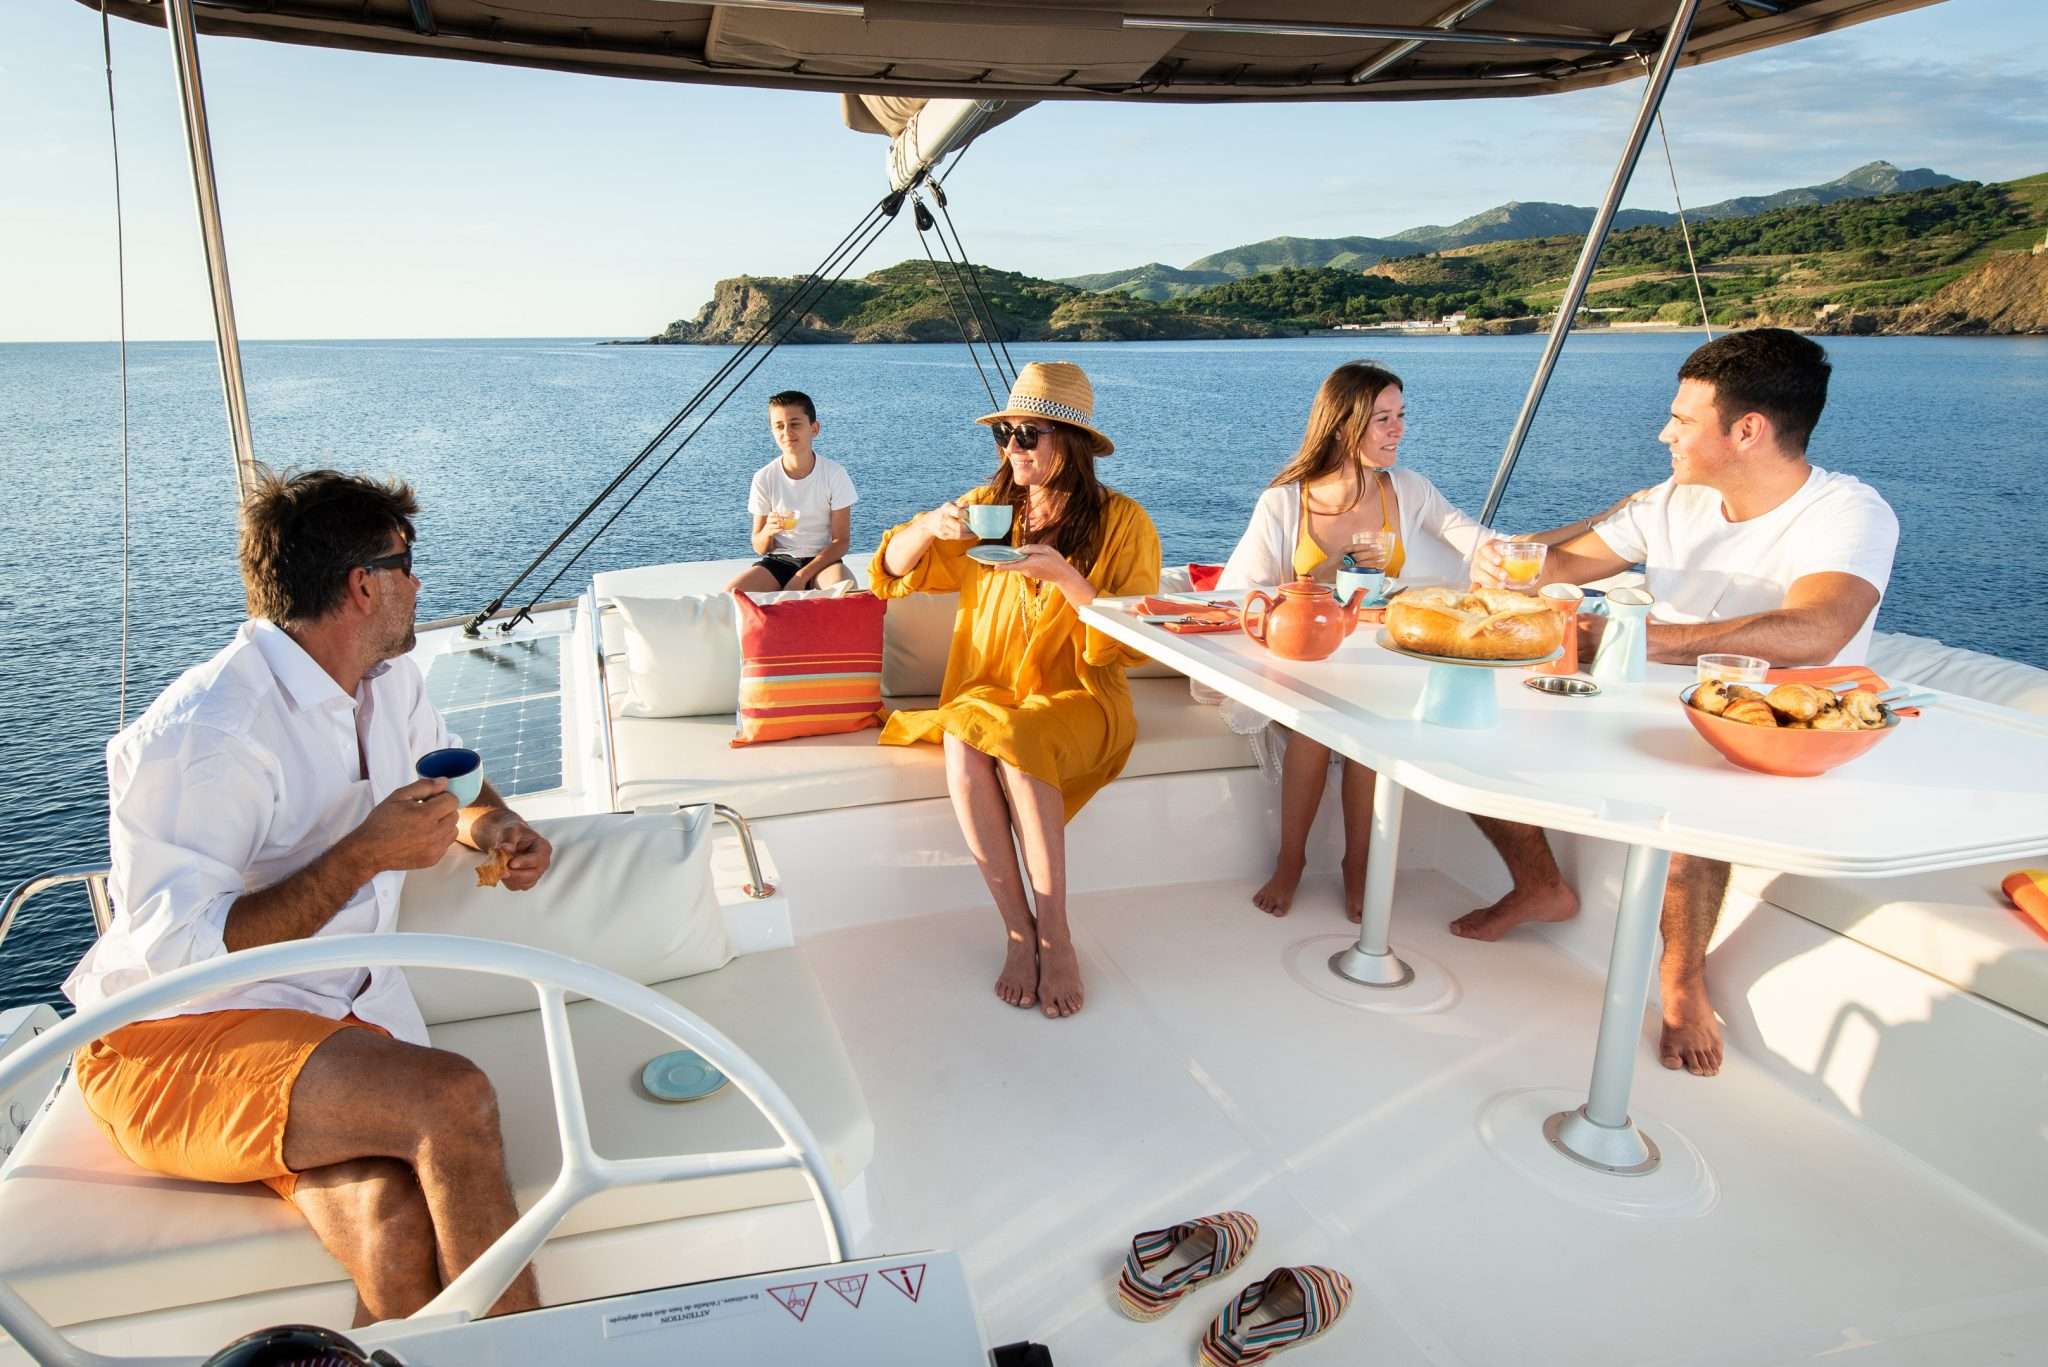 KITTIWAKE - Yacht Charter St Vincent & Boat hire in Caribbean 5